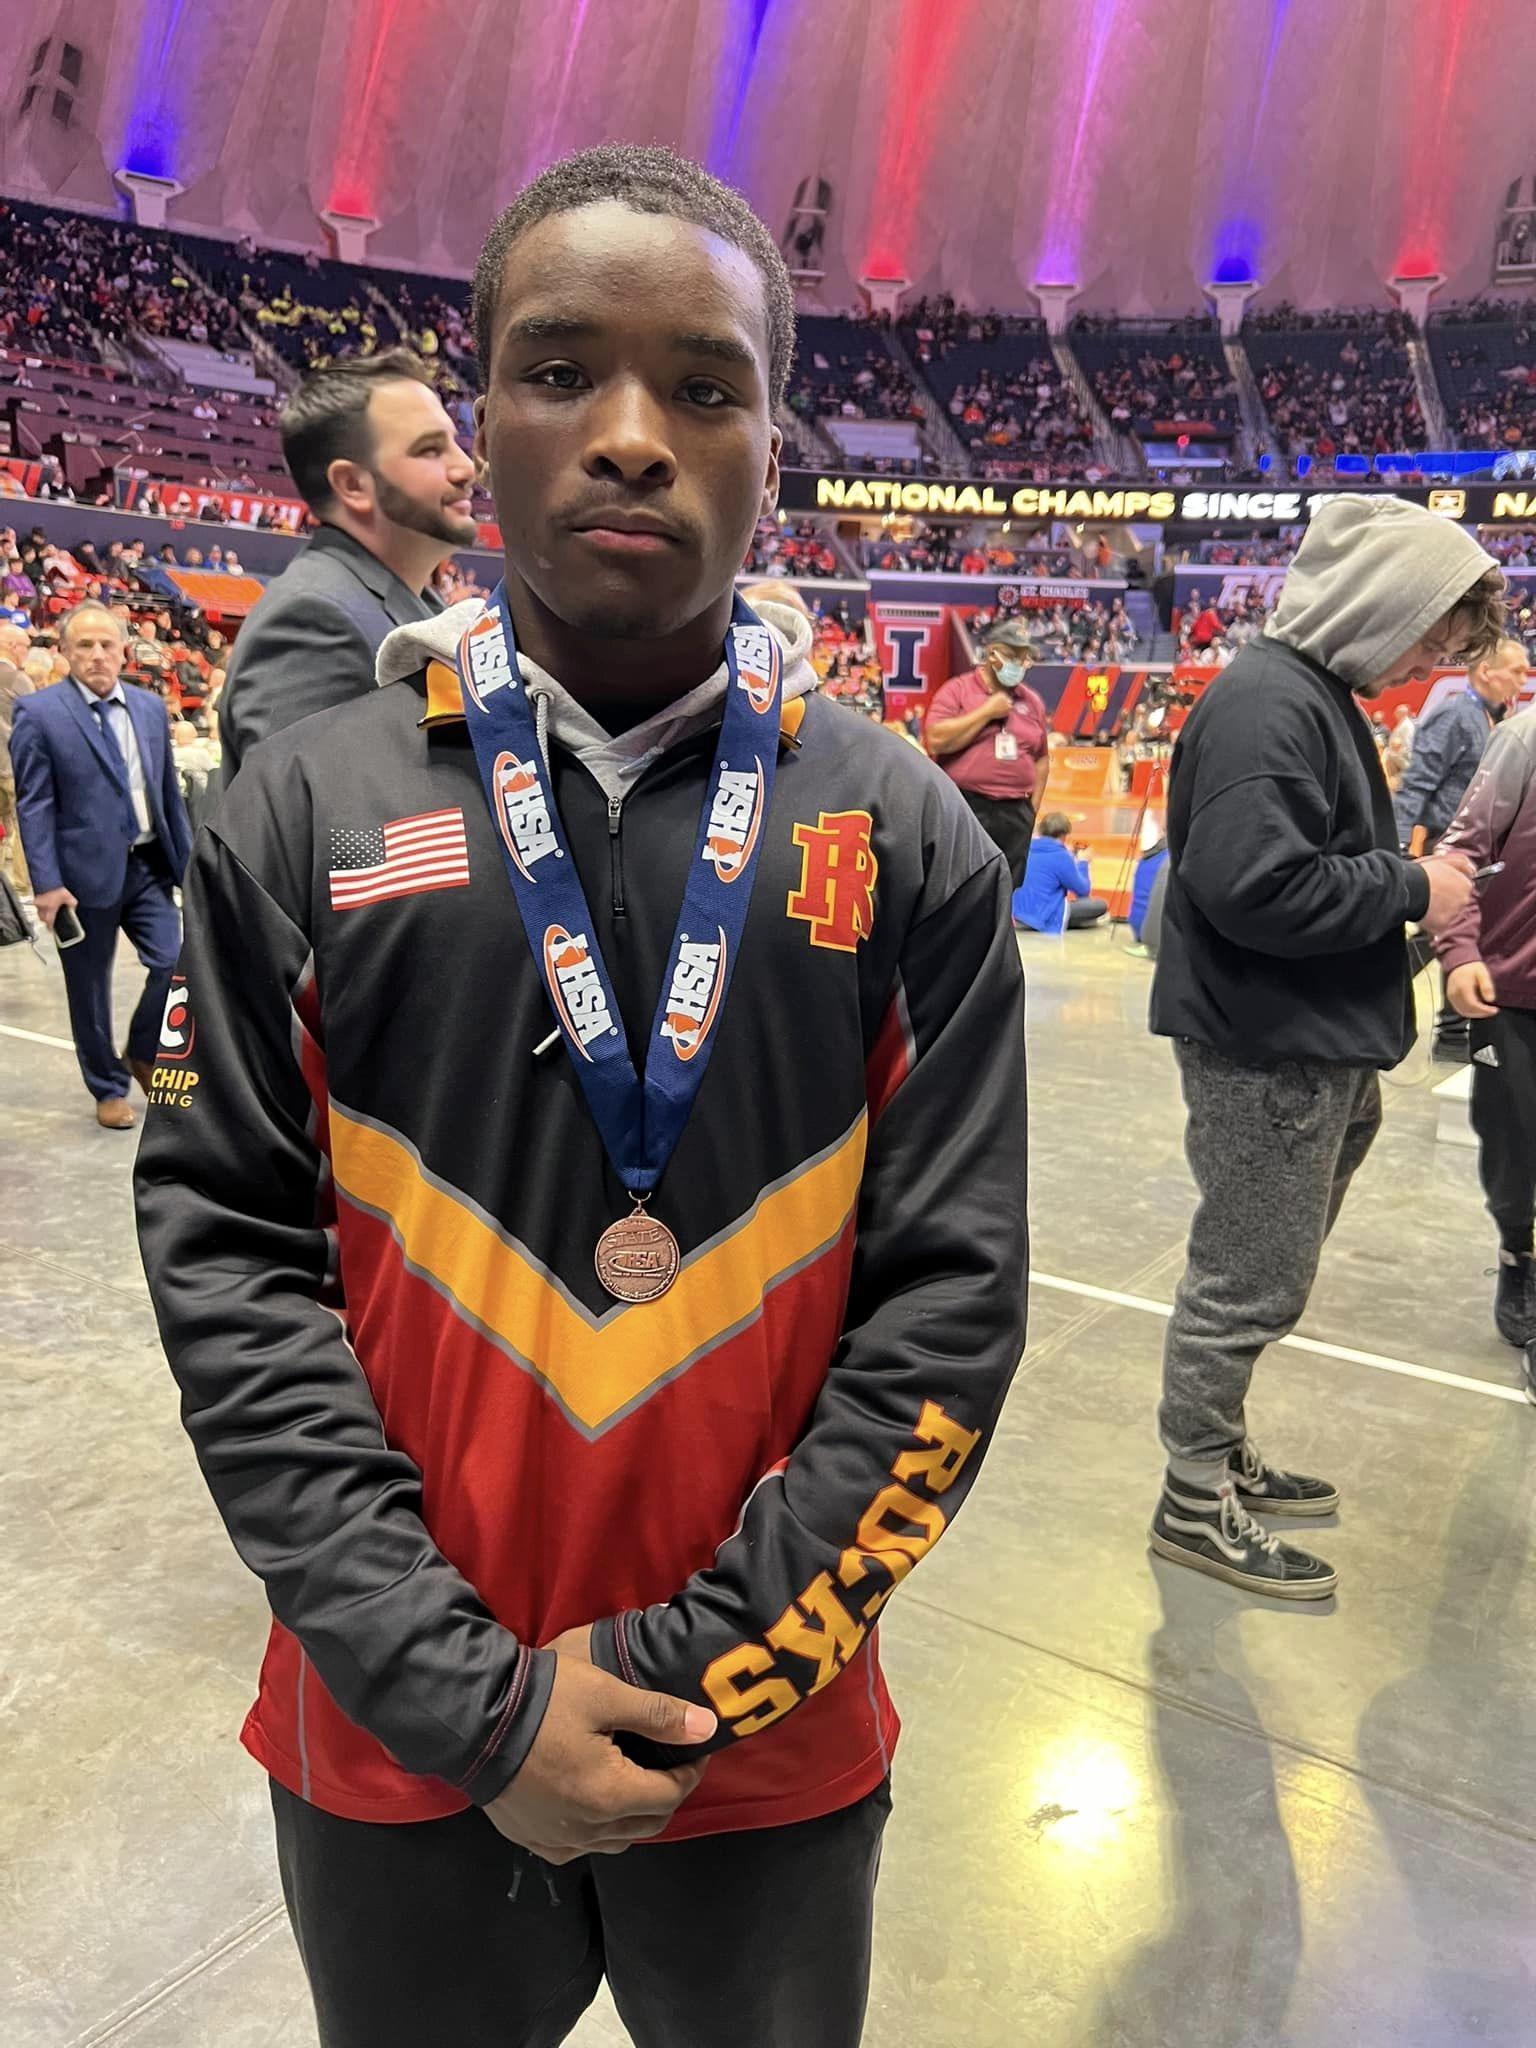 daniel with state medal